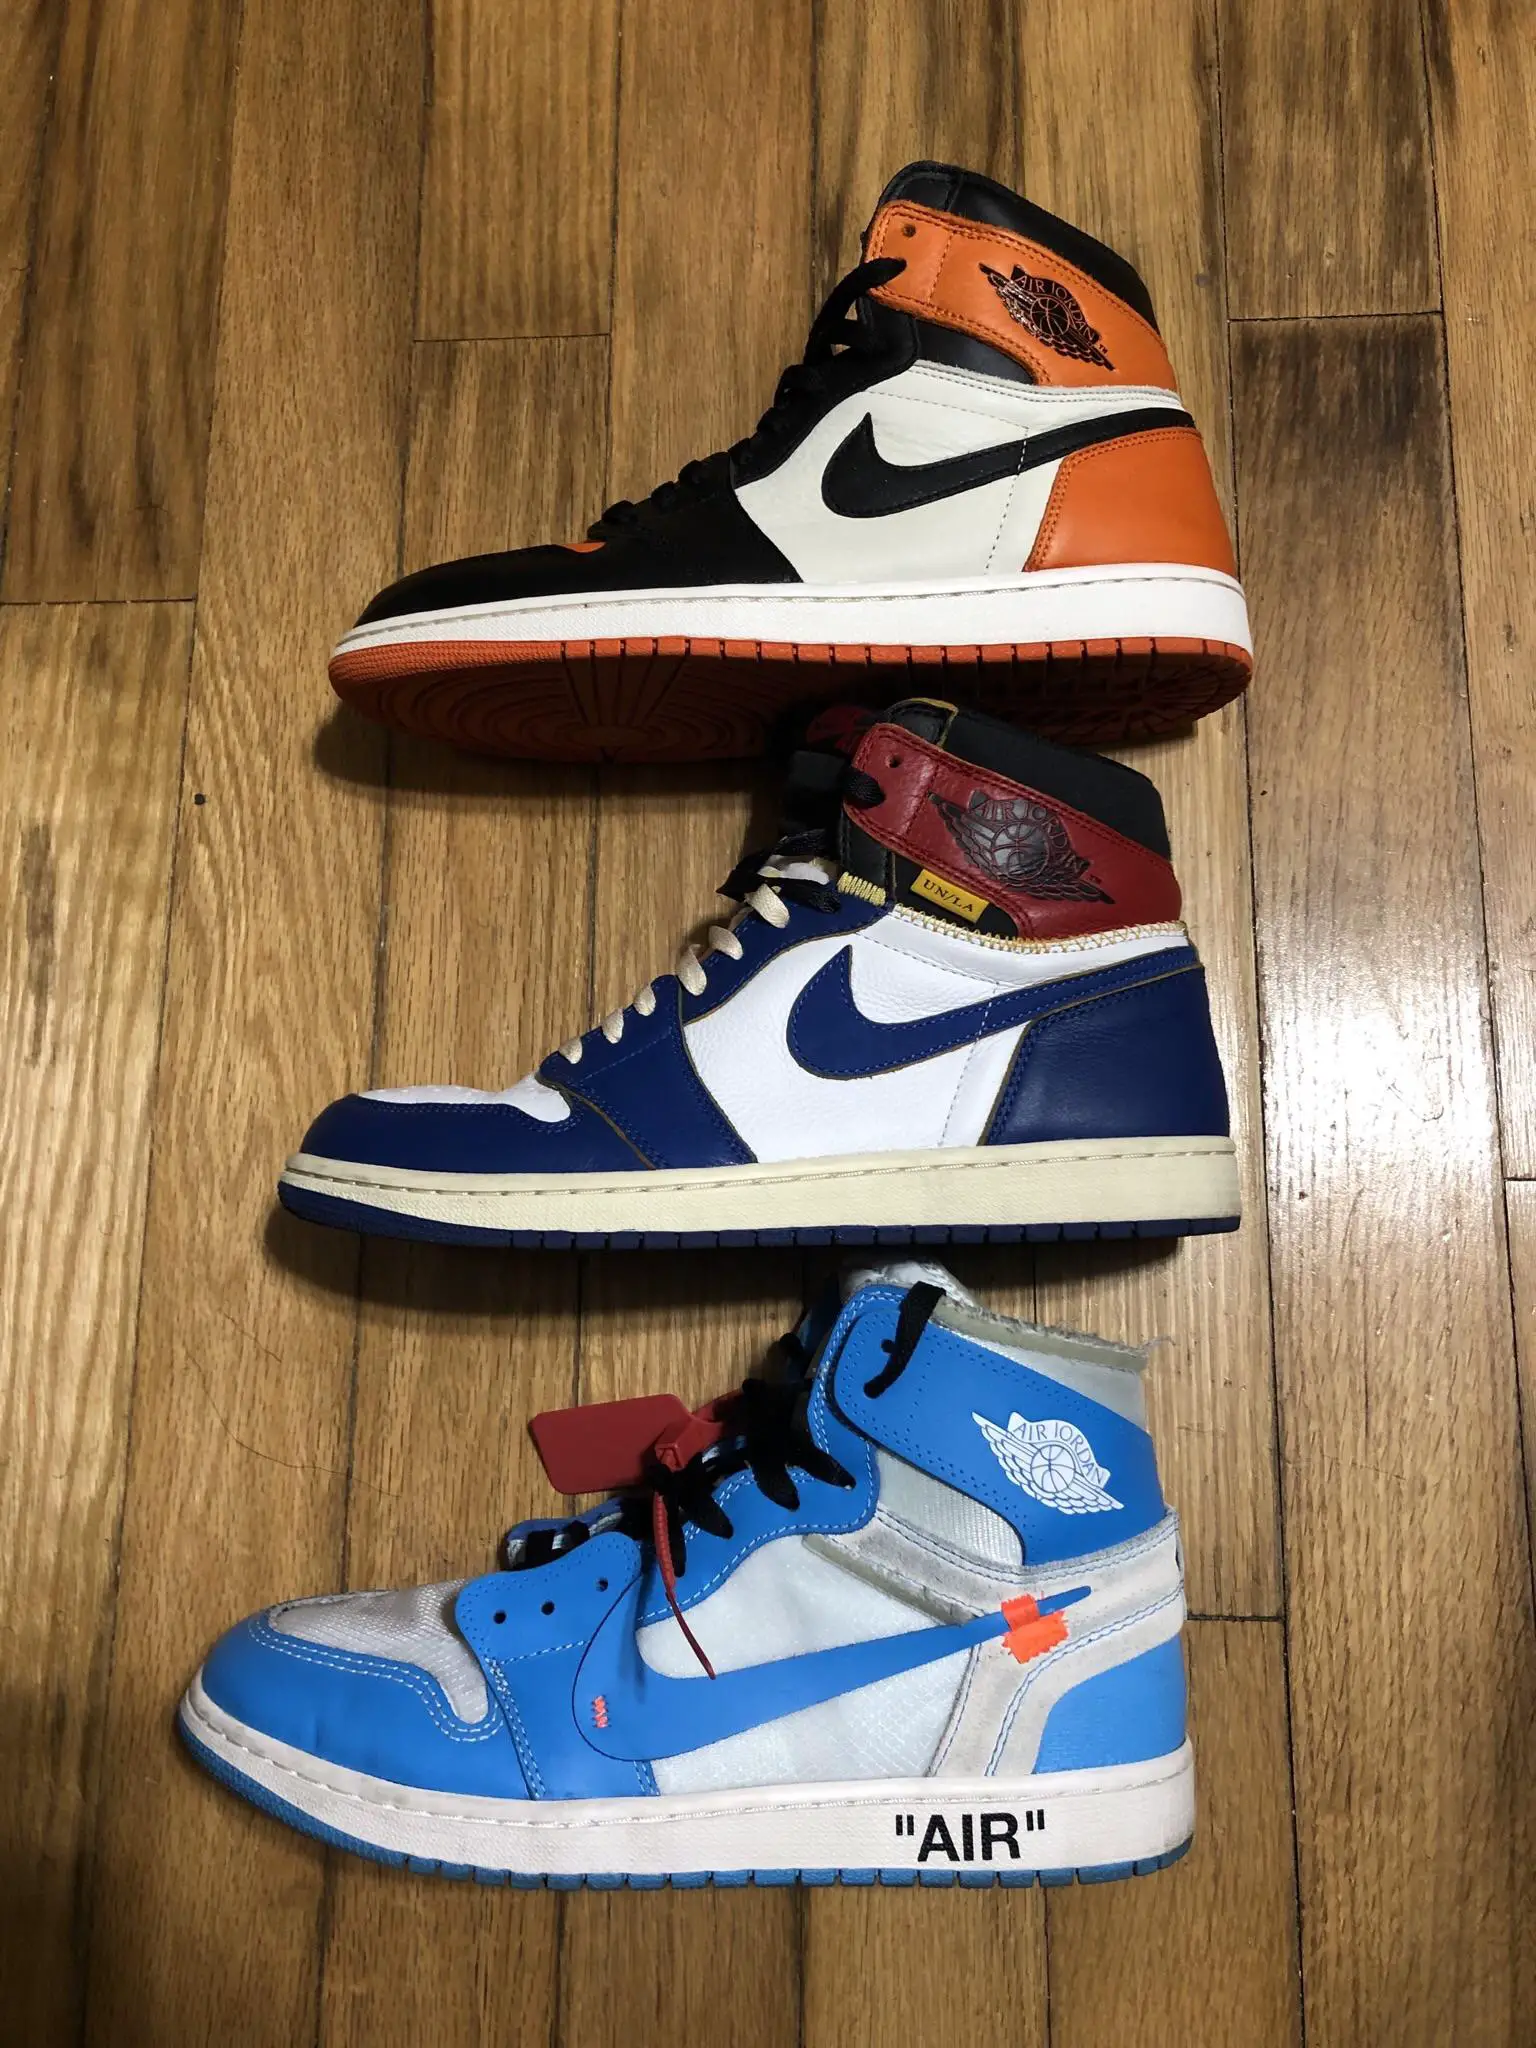 After having to sell my first pair of Shattered Backboards, i finally ...